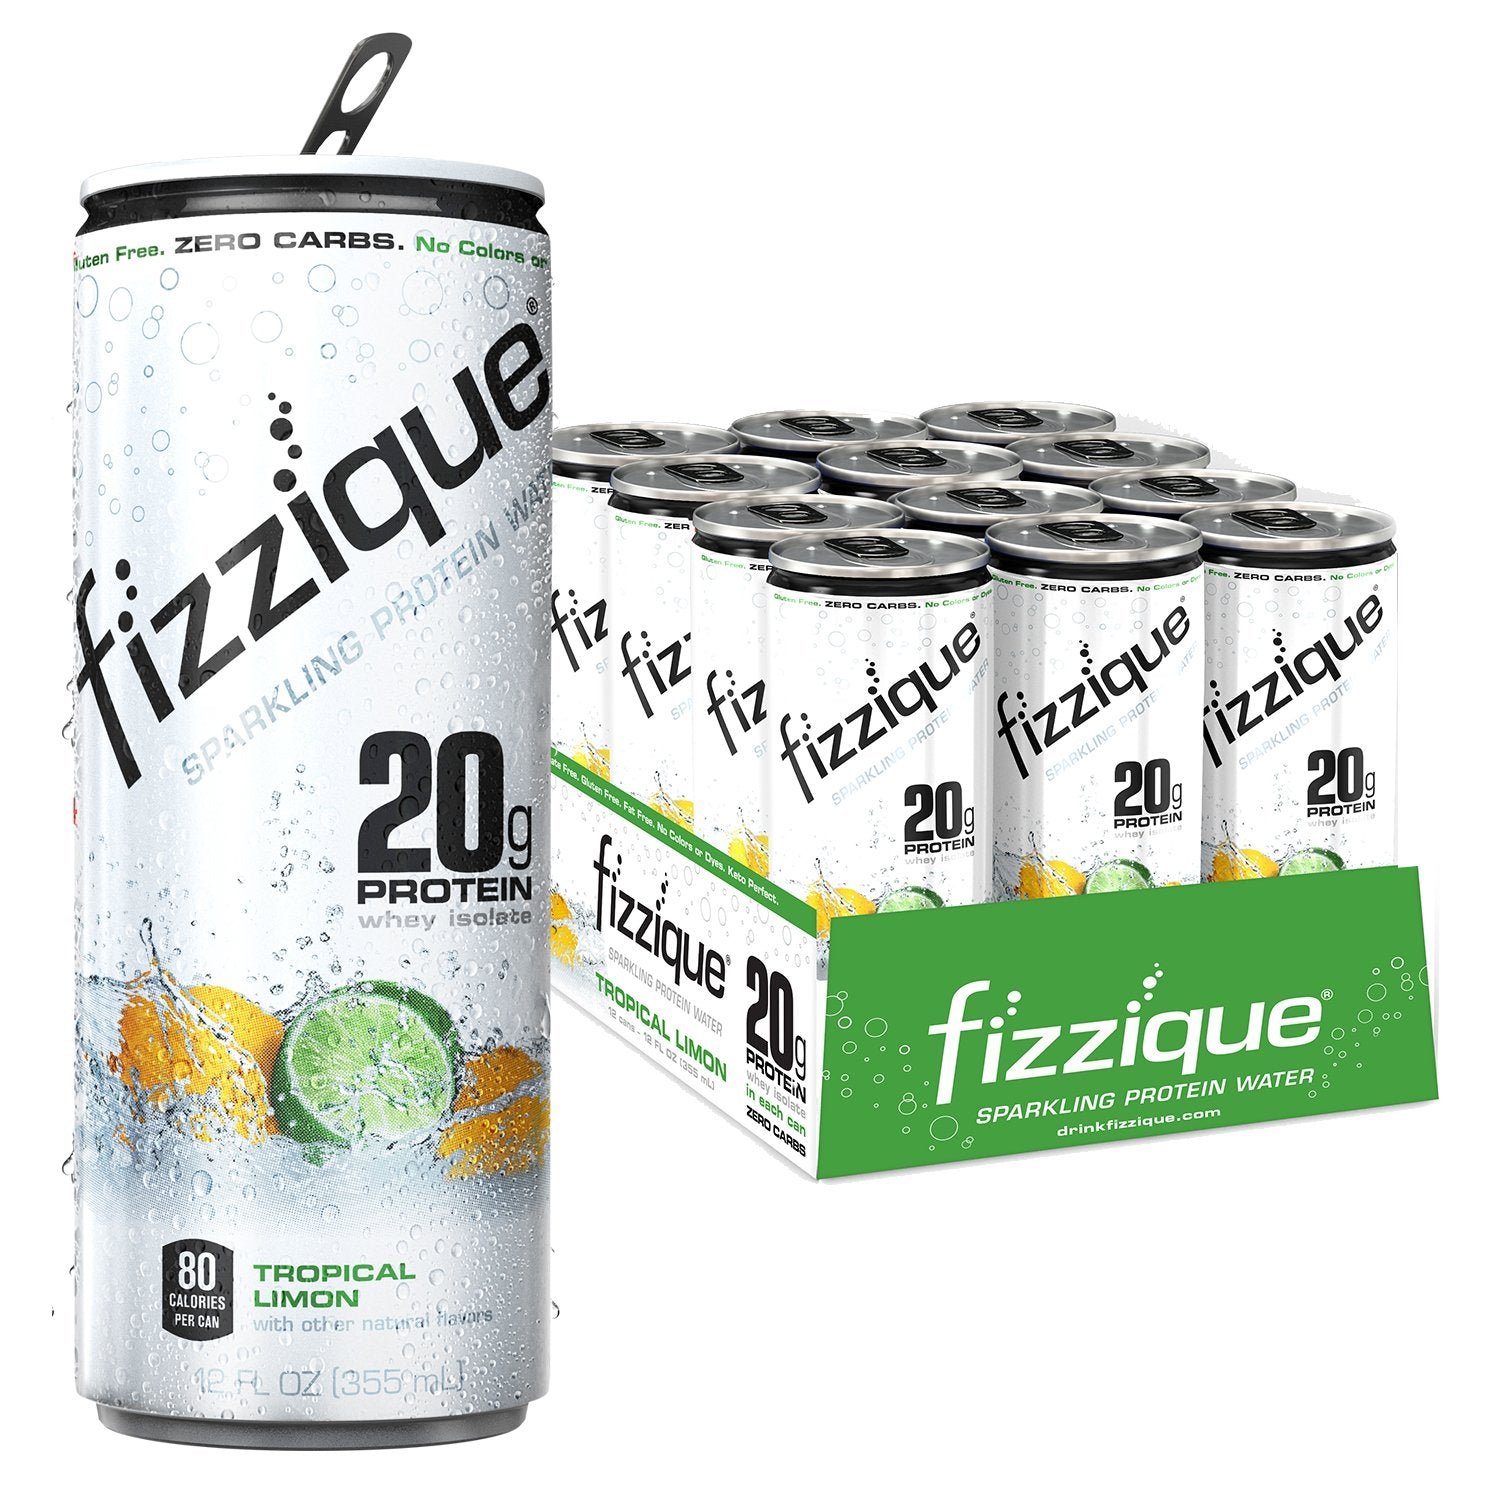 Fizzique Sparkling Protein Water Tropical Limon / 12x355ml